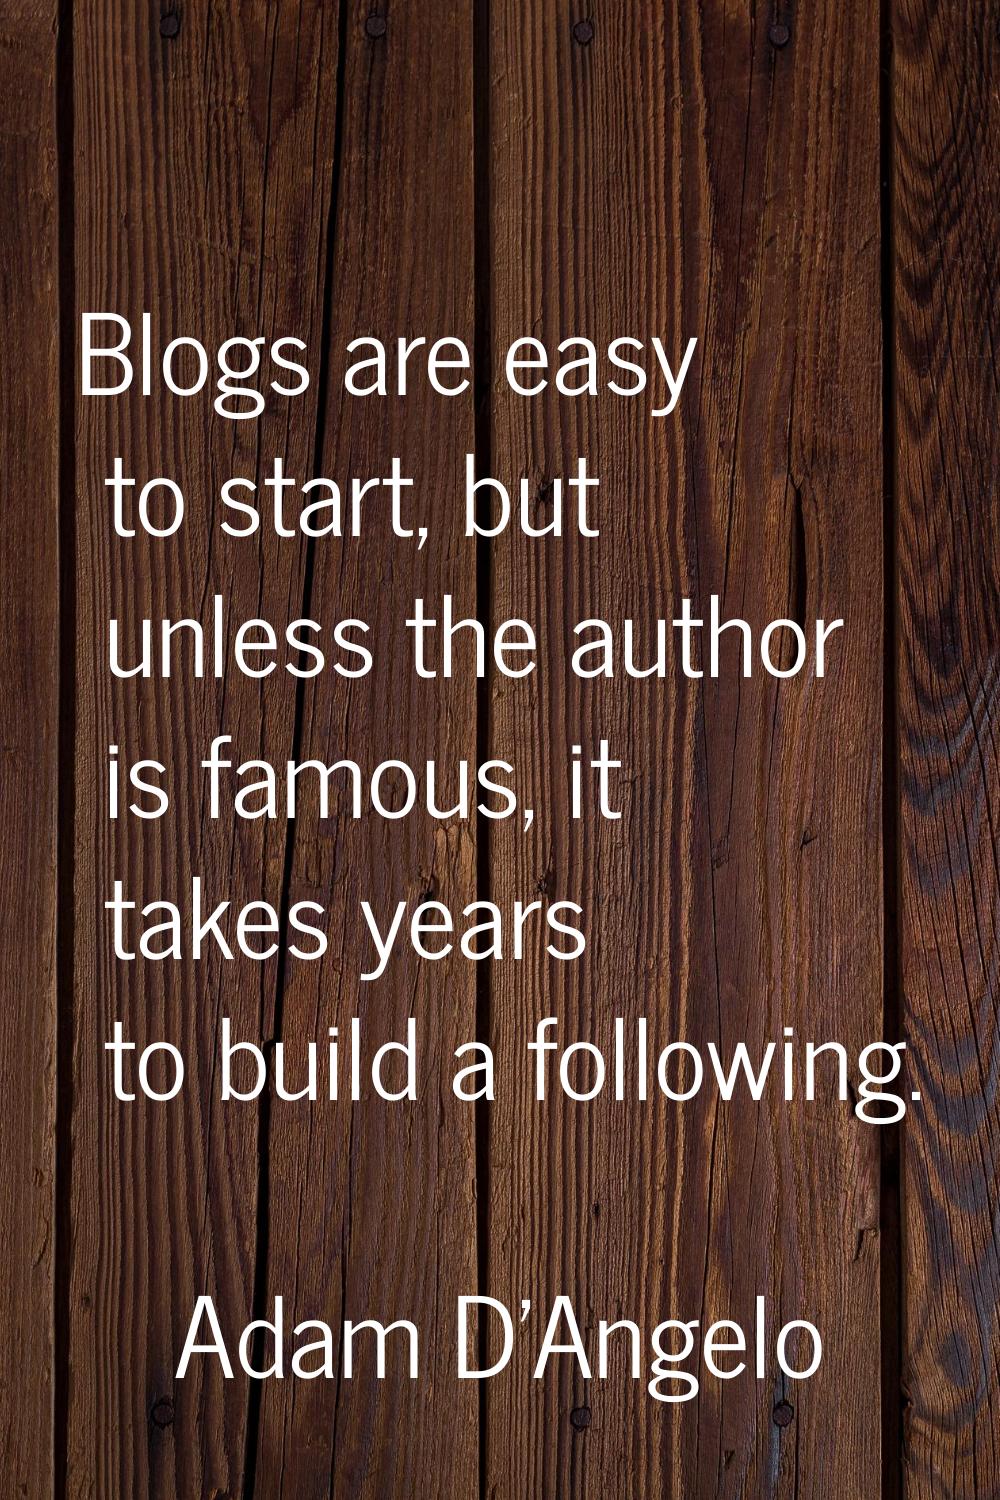 Blogs are easy to start, but unless the author is famous, it takes years to build a following.